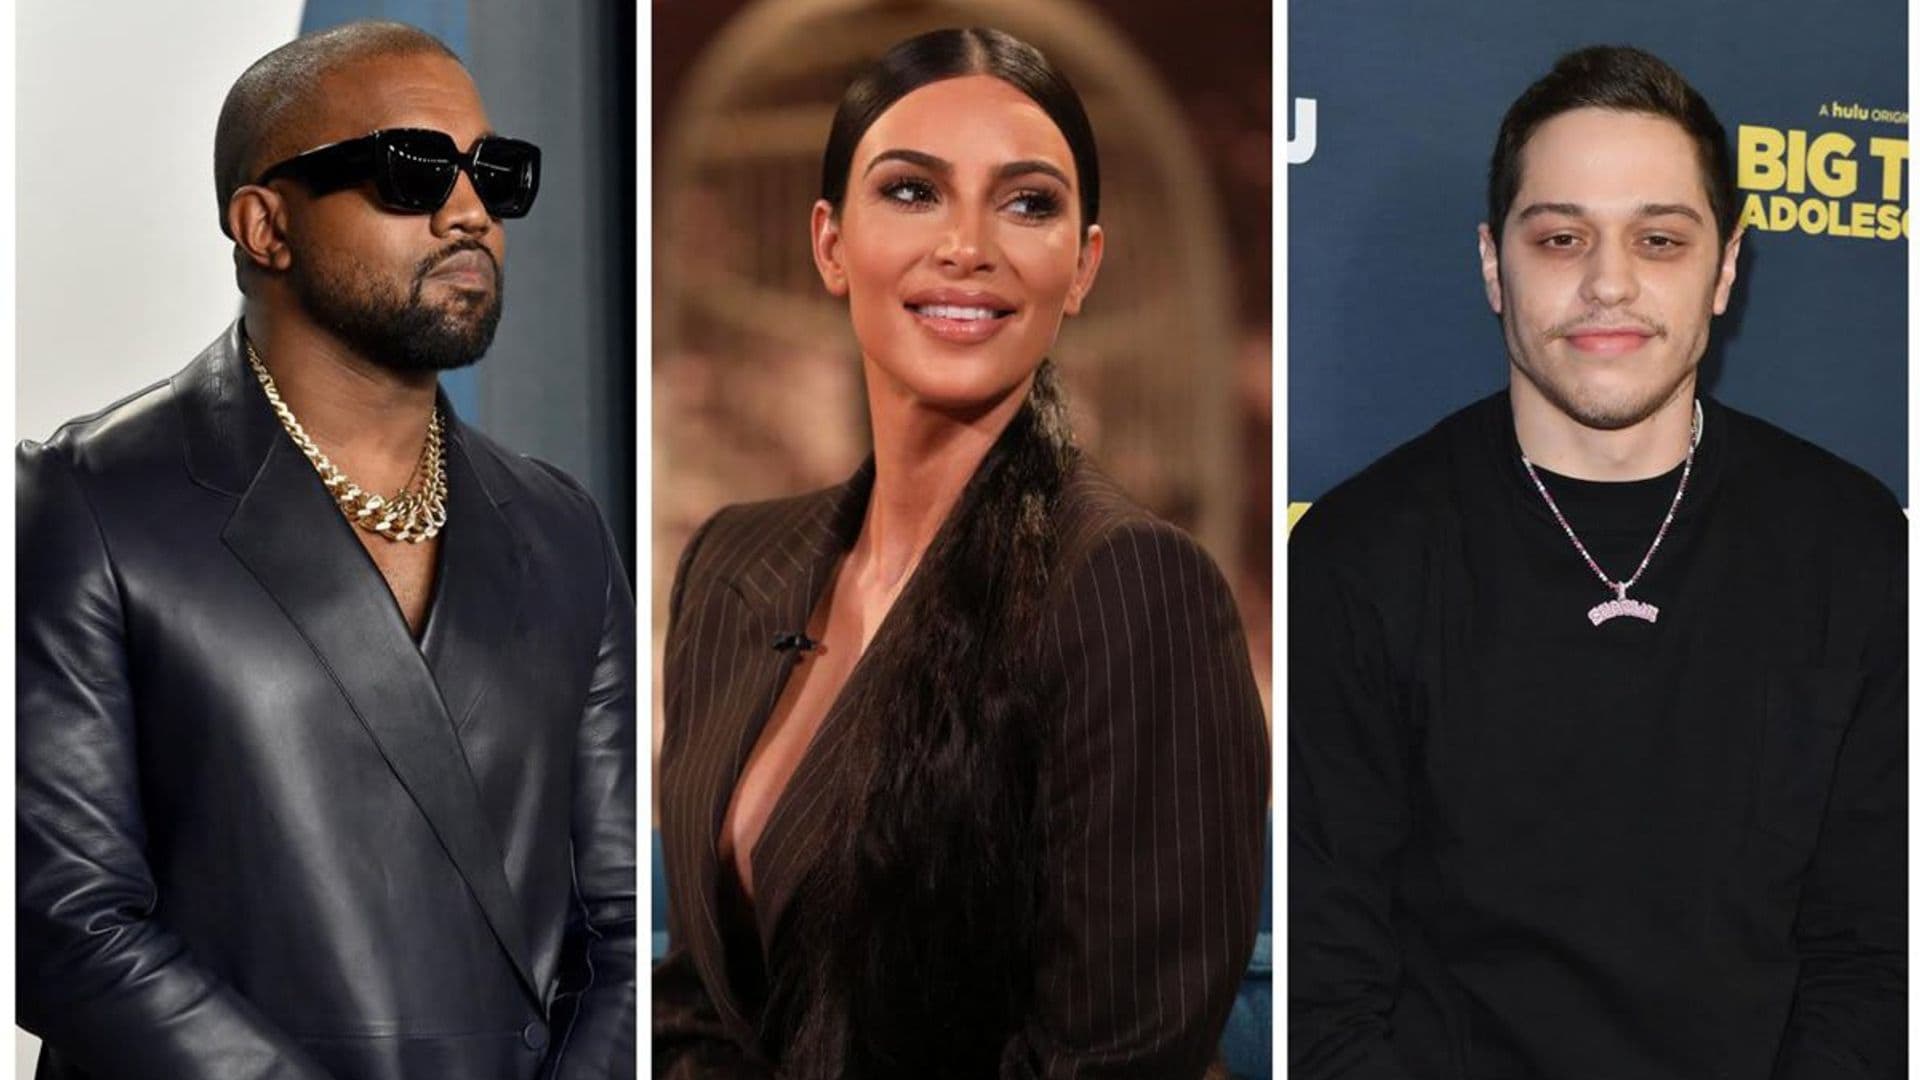 Kanye West wants to reconcile, but what does Kim Kardashian really feels?